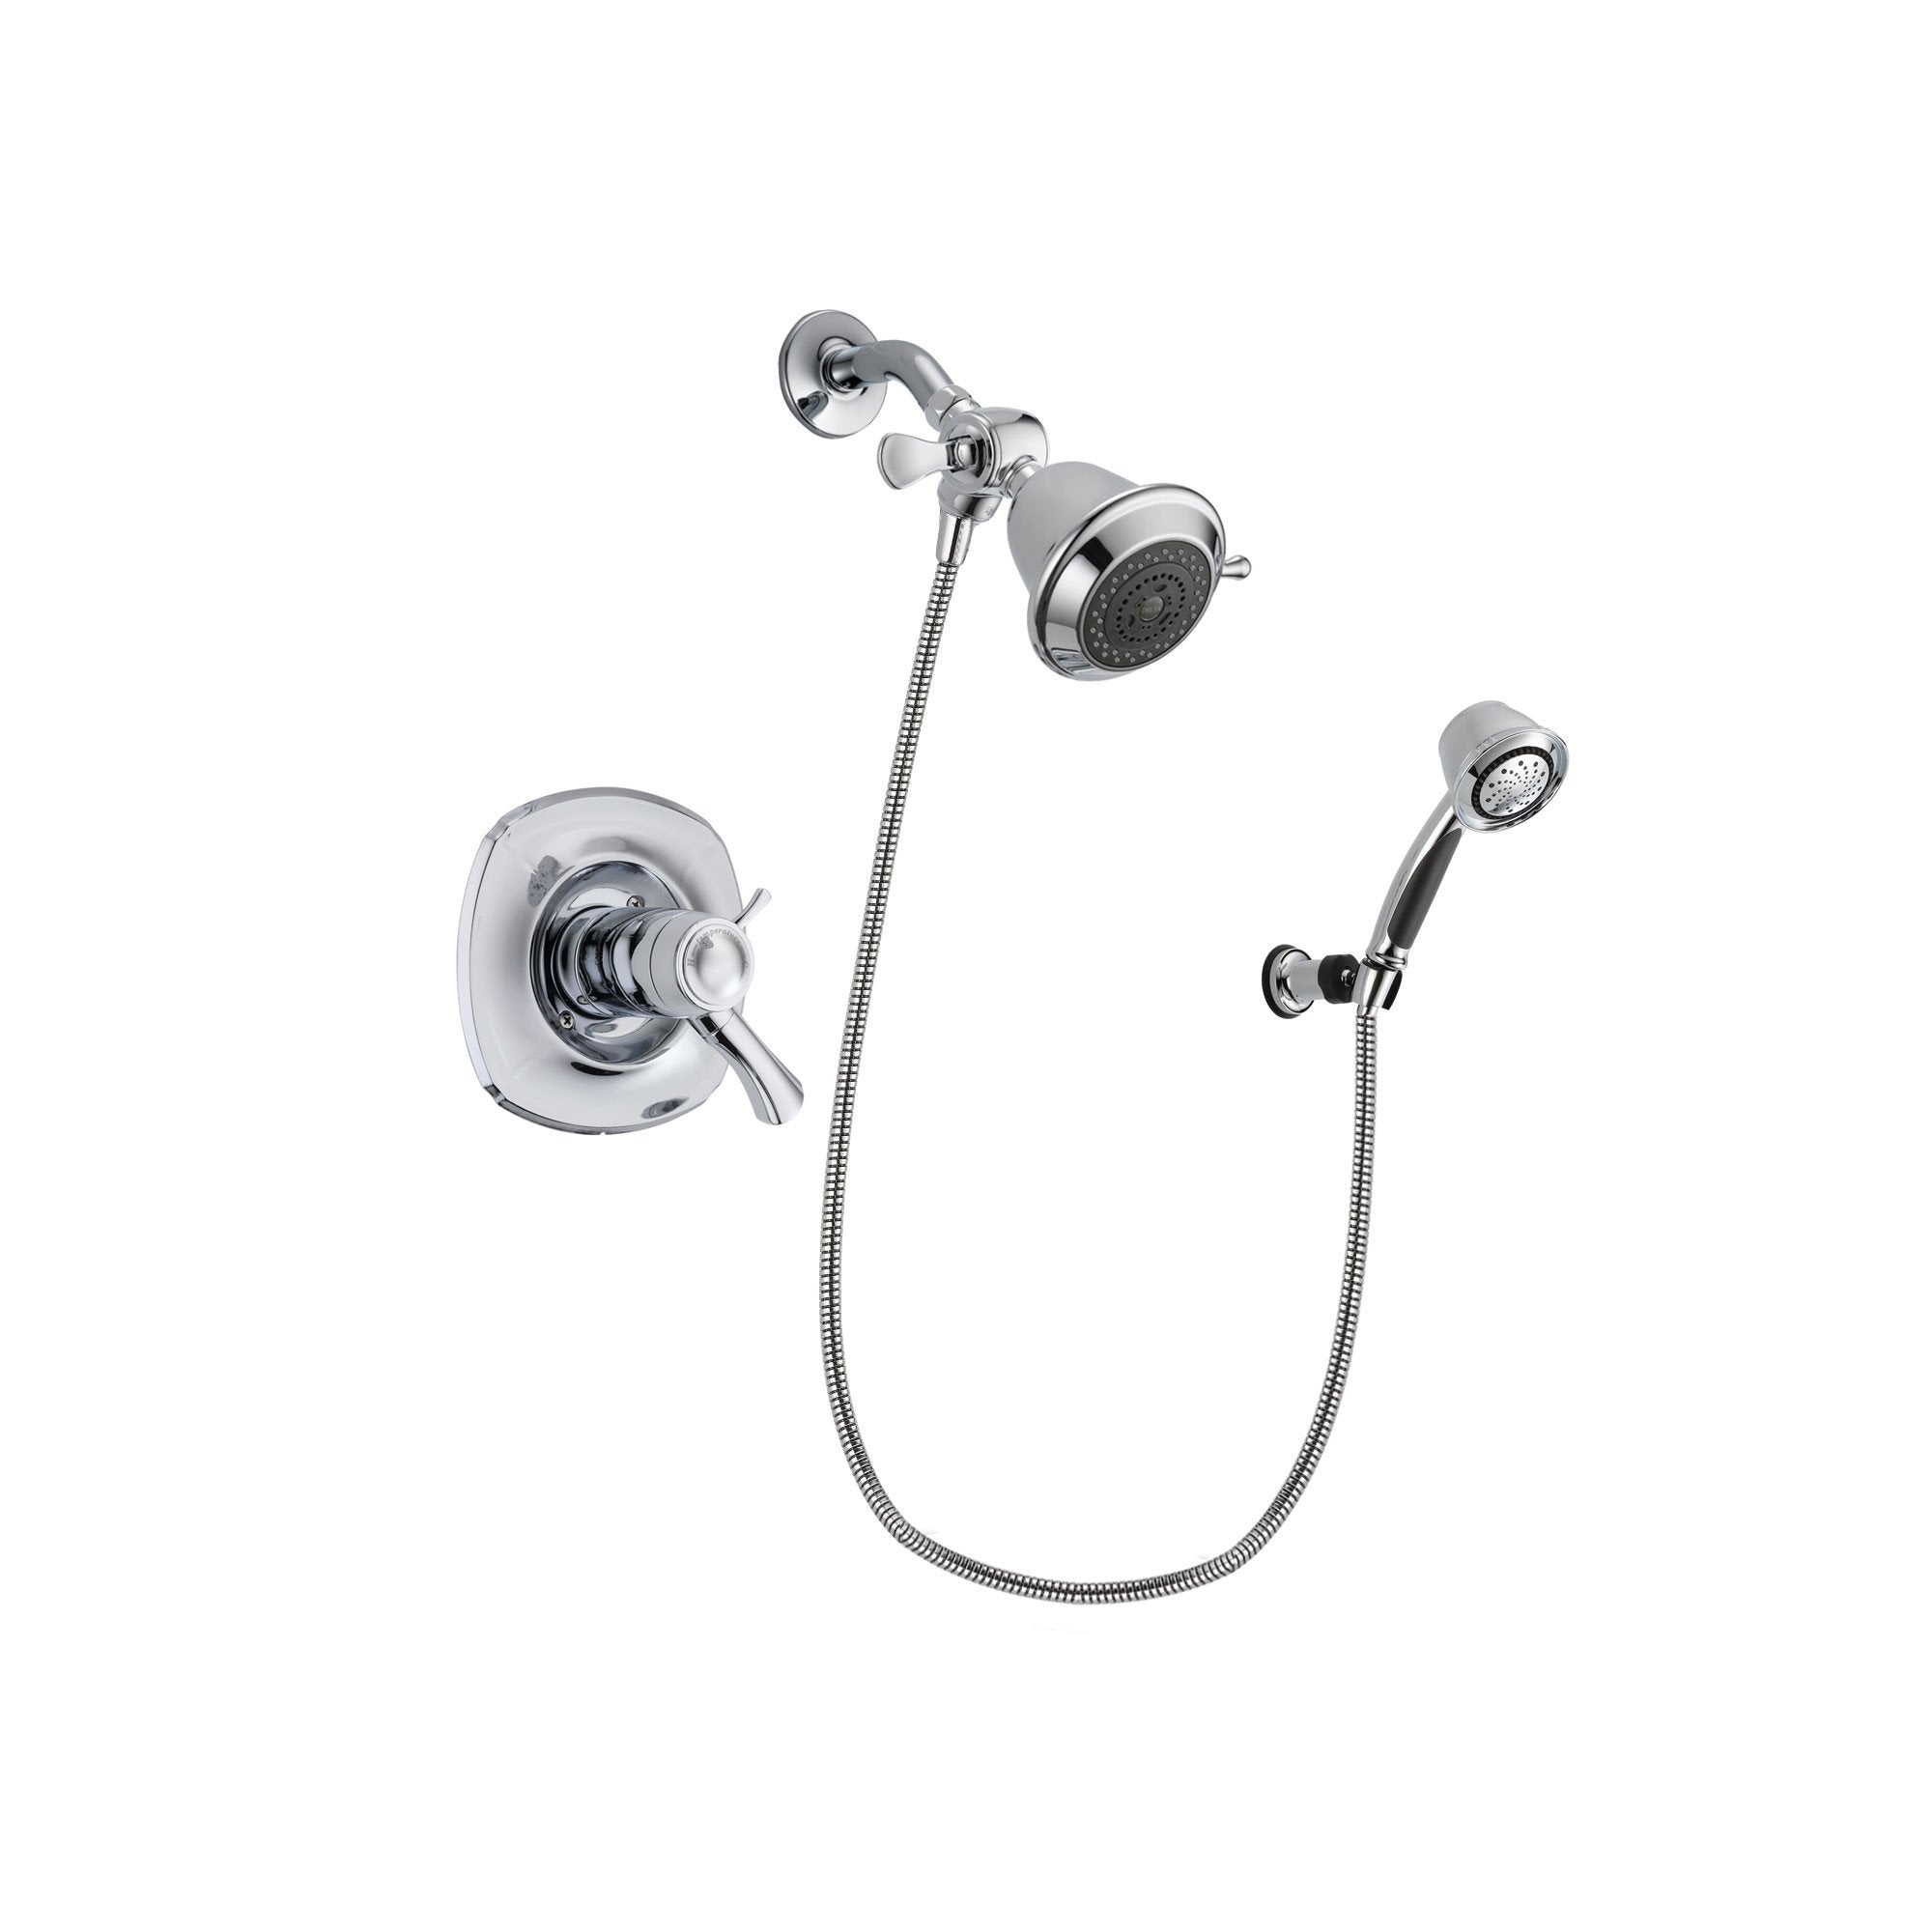 Delta Addison Chrome Finish Thermostatic Shower Faucet System Package with Shower Head and 5-Spray Adjustable Wall Mount Hand Shower Includes Rough-in Valve DSP0296V